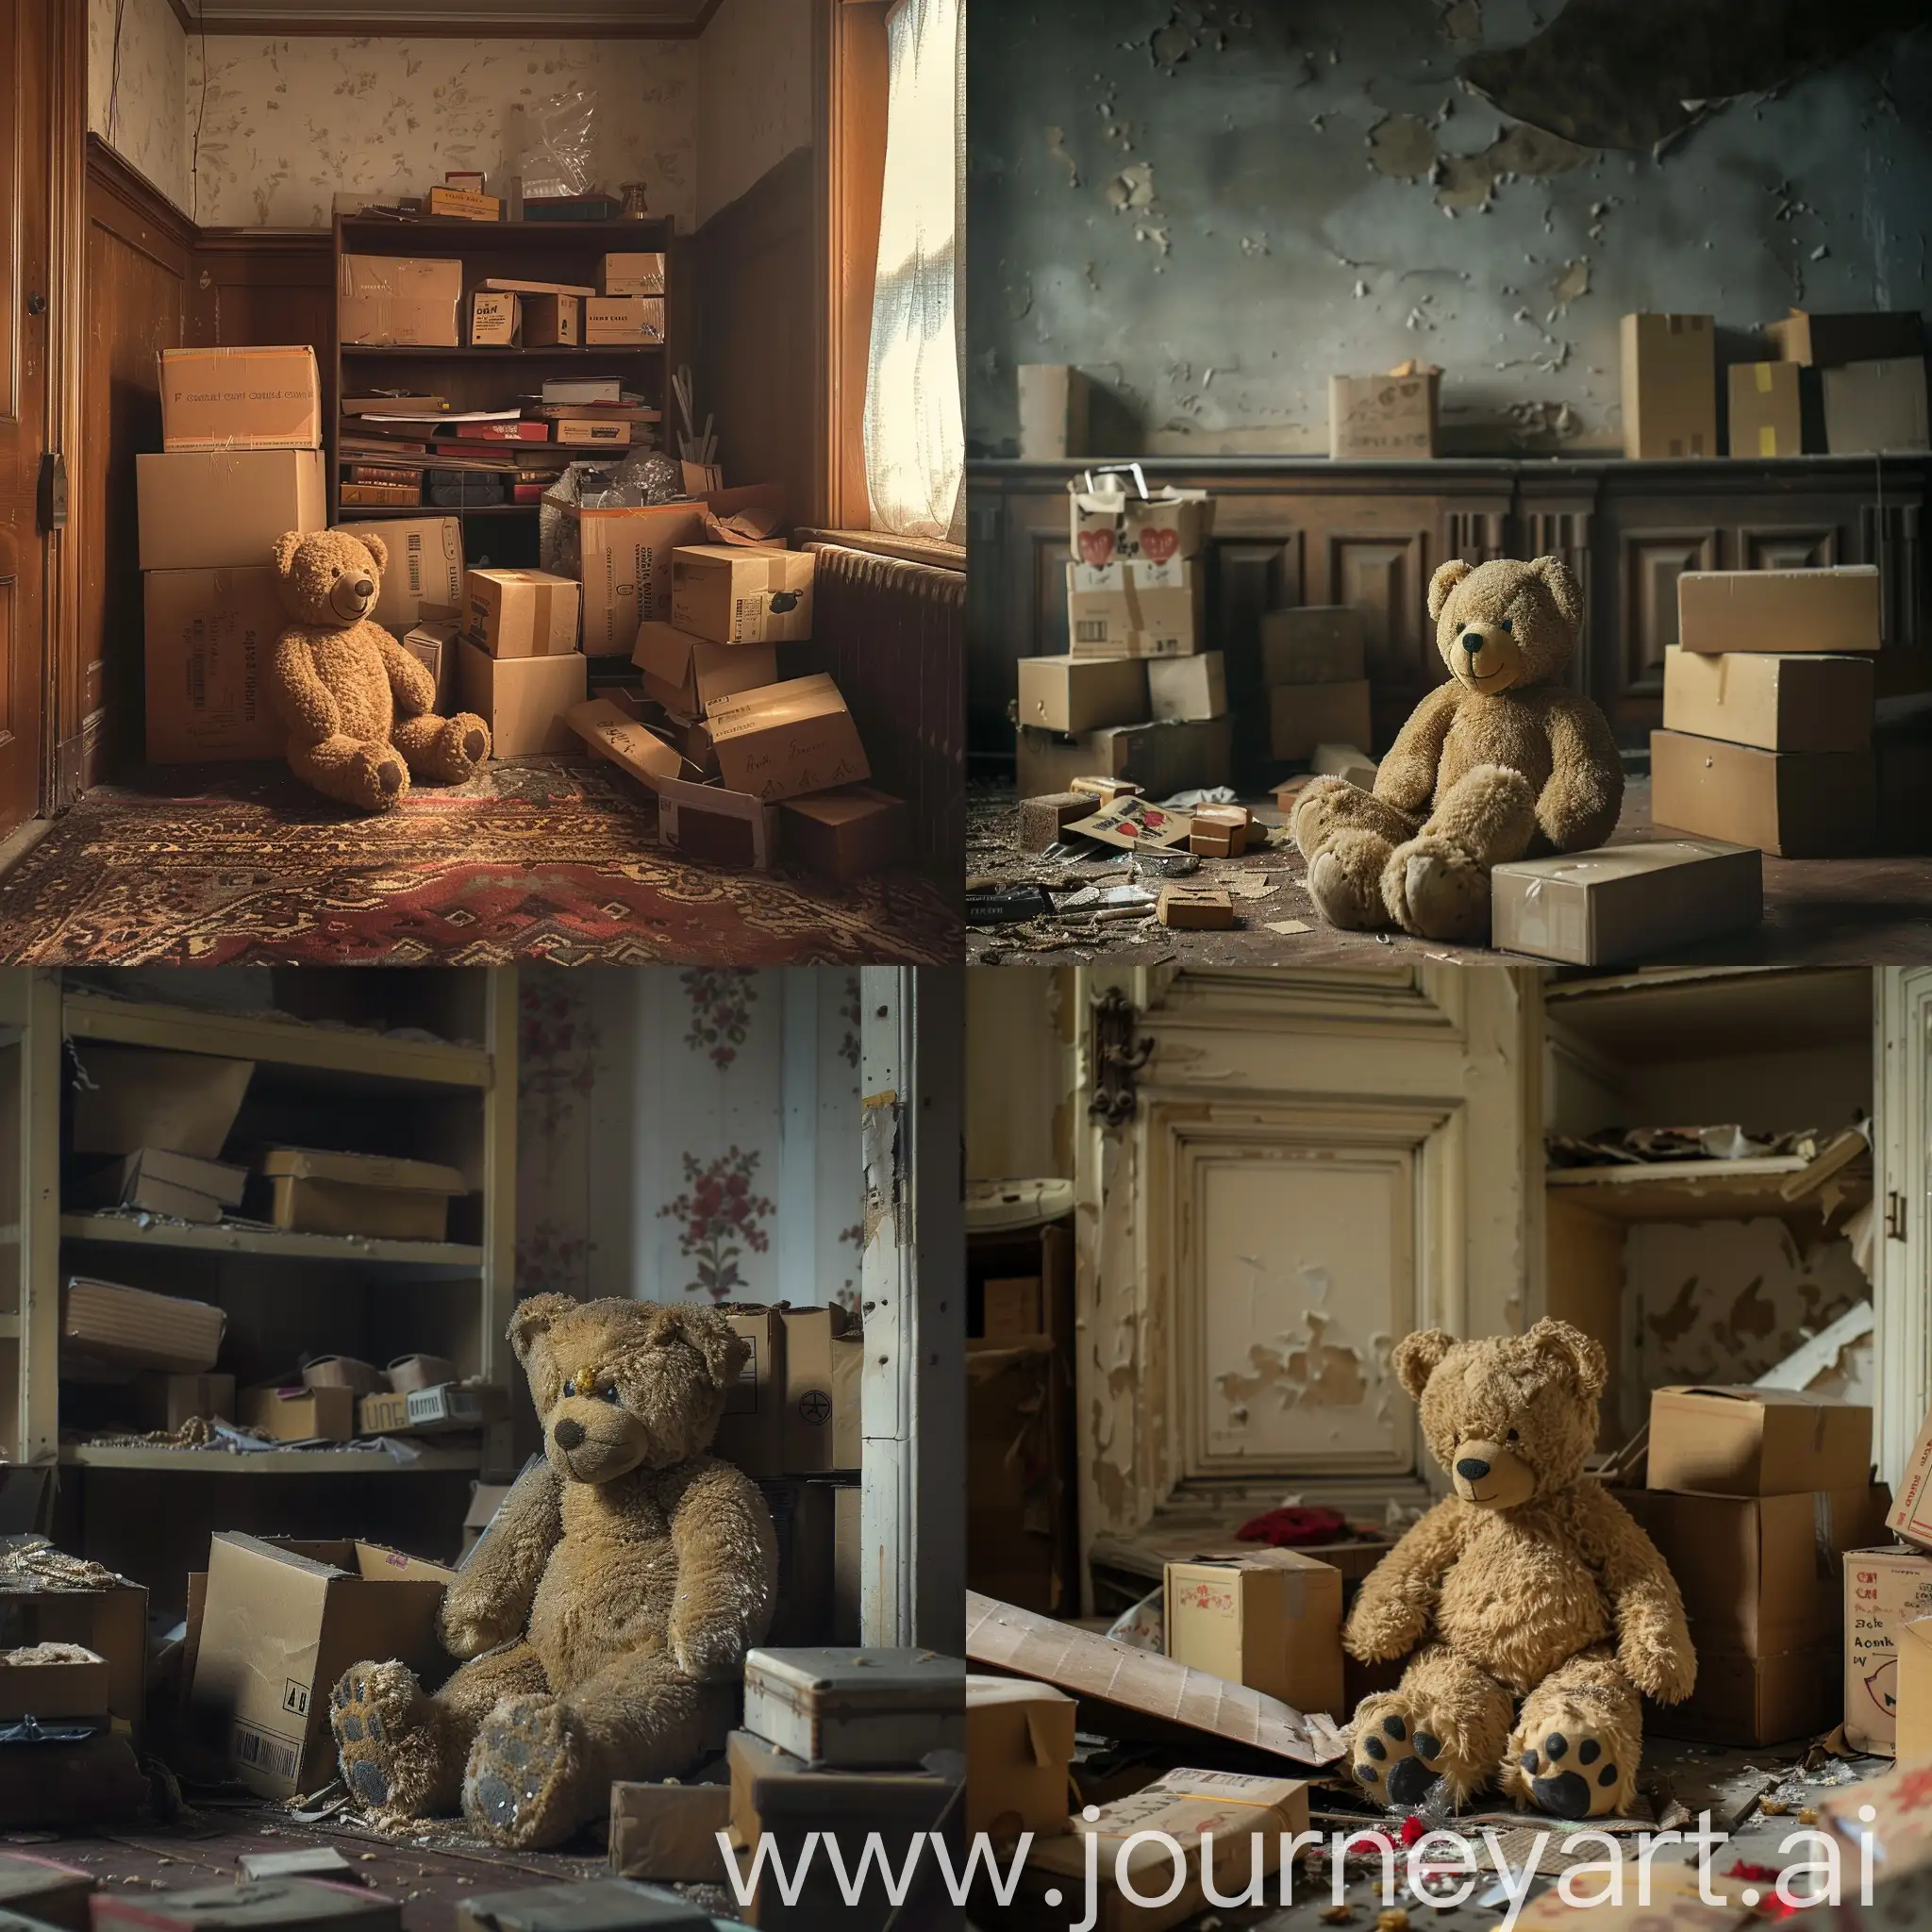 Vintage-Teddy-Bear-in-Dimly-Lit-Room-Surrounded-by-Boxes